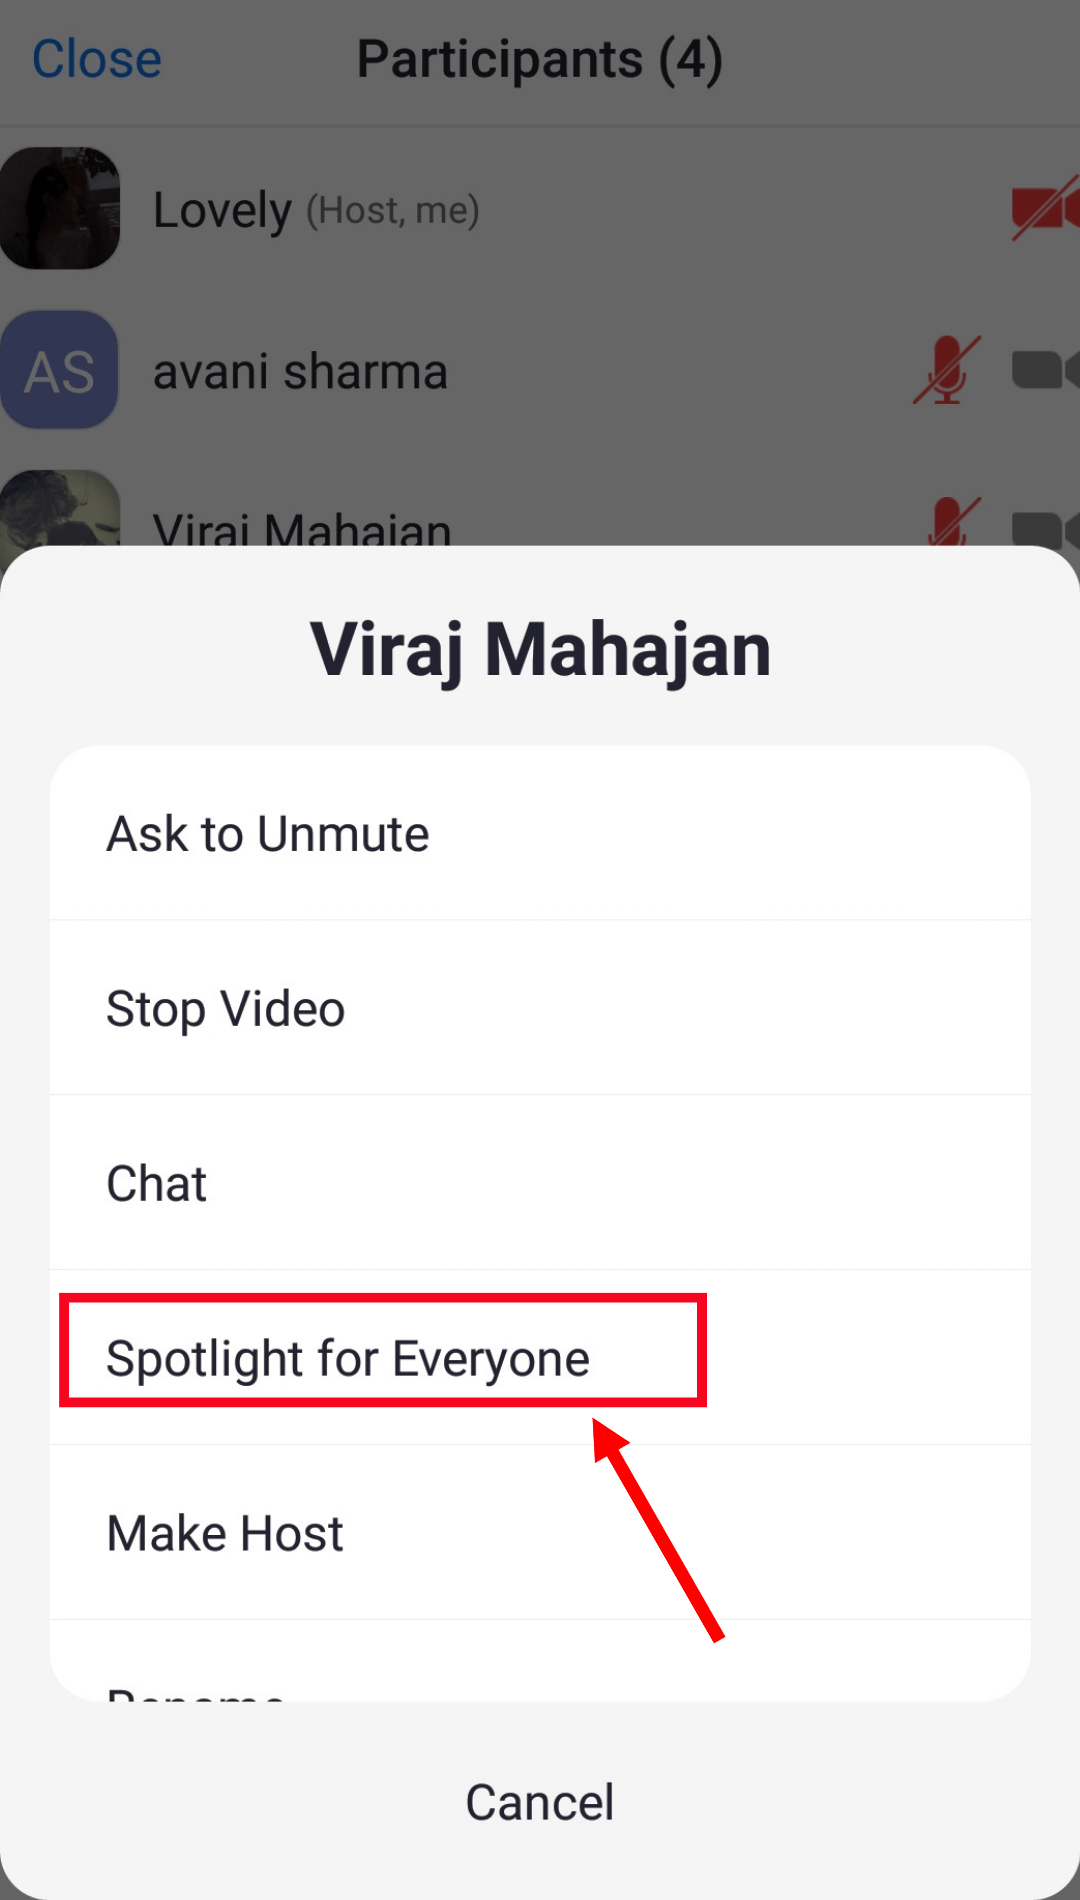 select spotlight for everyone to add participants to spotlight